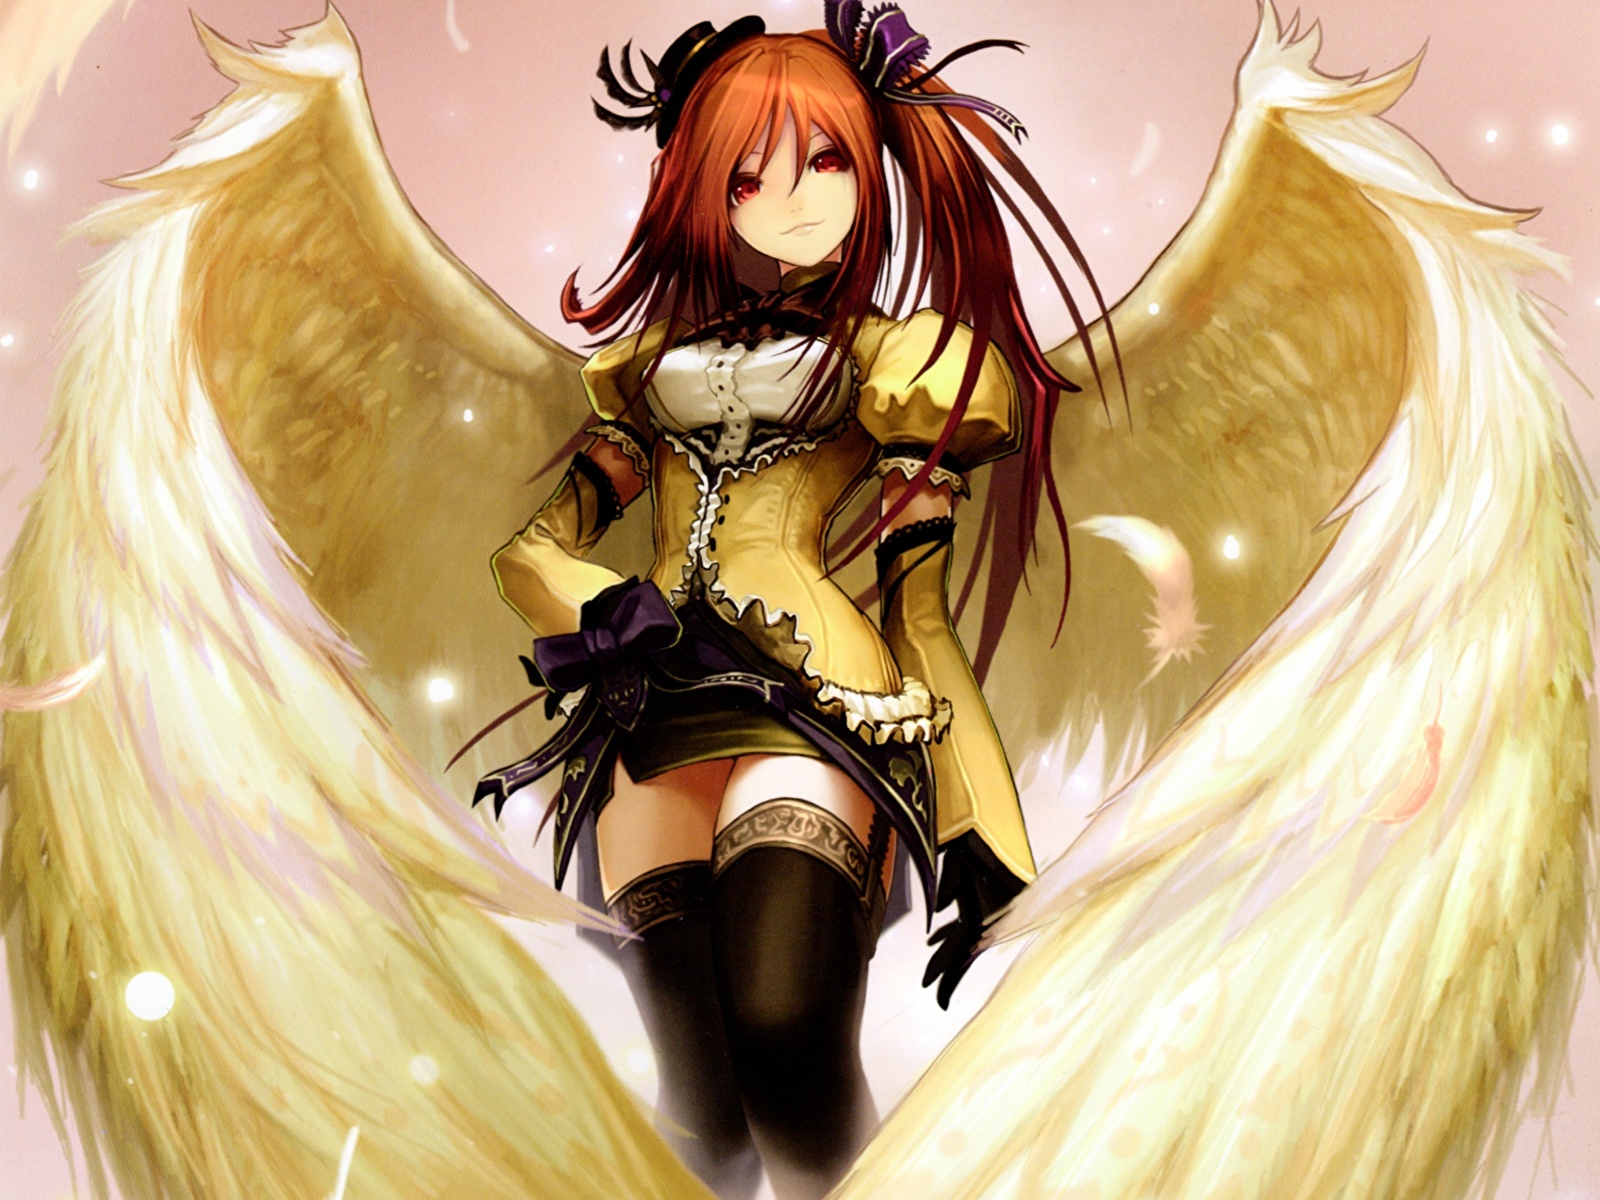 Angel Anime Girl wallpaper by kmliamlia04 - Download on ZEDGE™ | a3d5